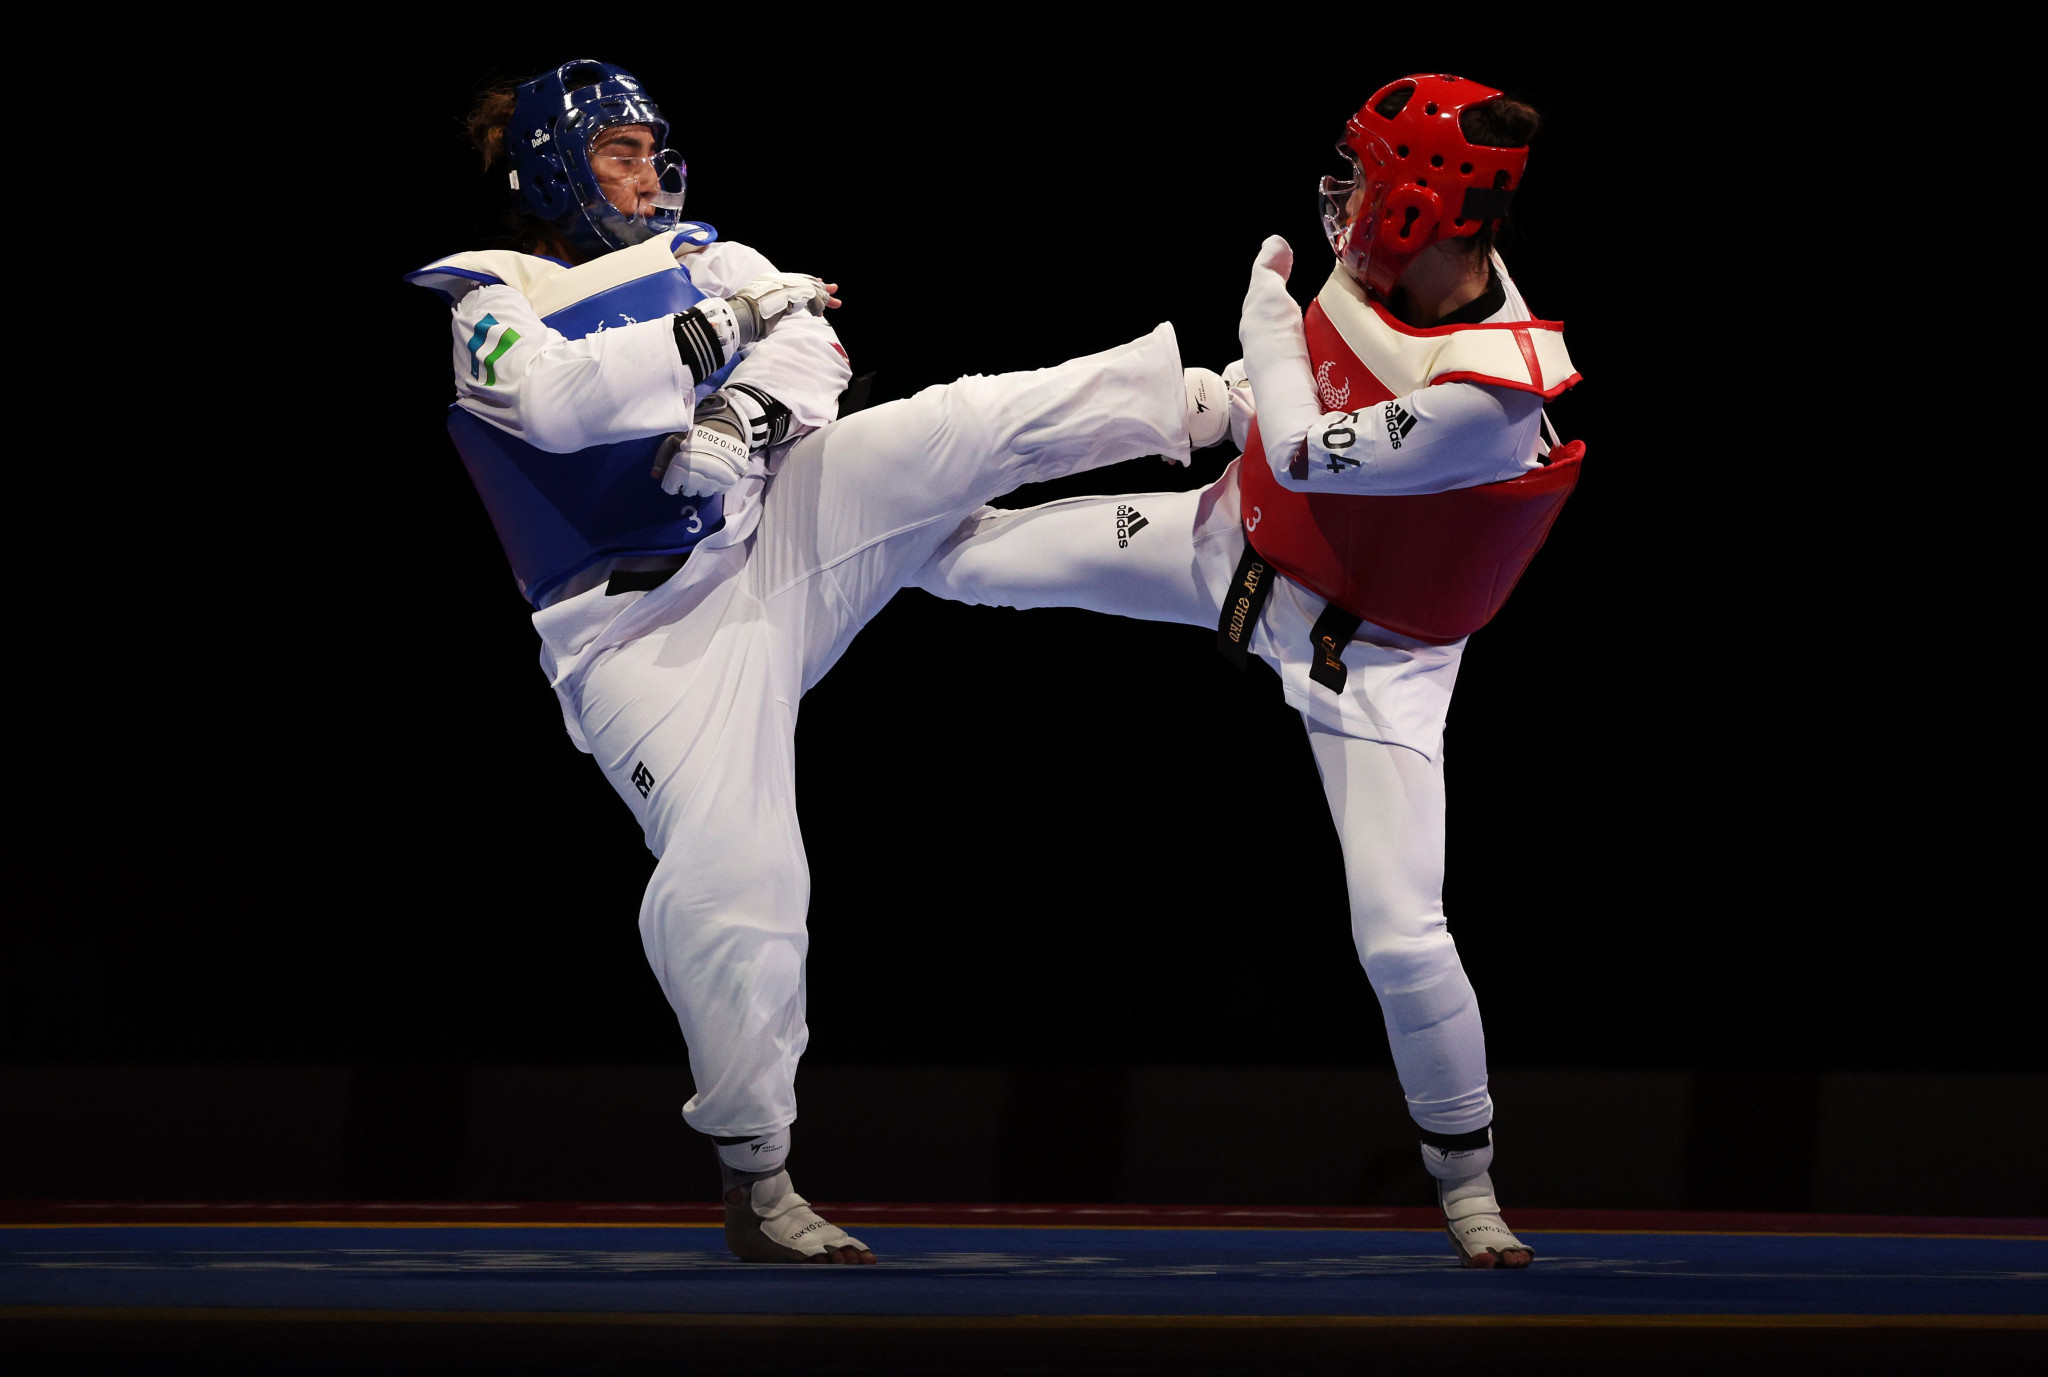 Chungwon Choue pointed to the sport's debut at the Paralympics among World Taekwondo's achievements in the last 50 years ©Getty Images